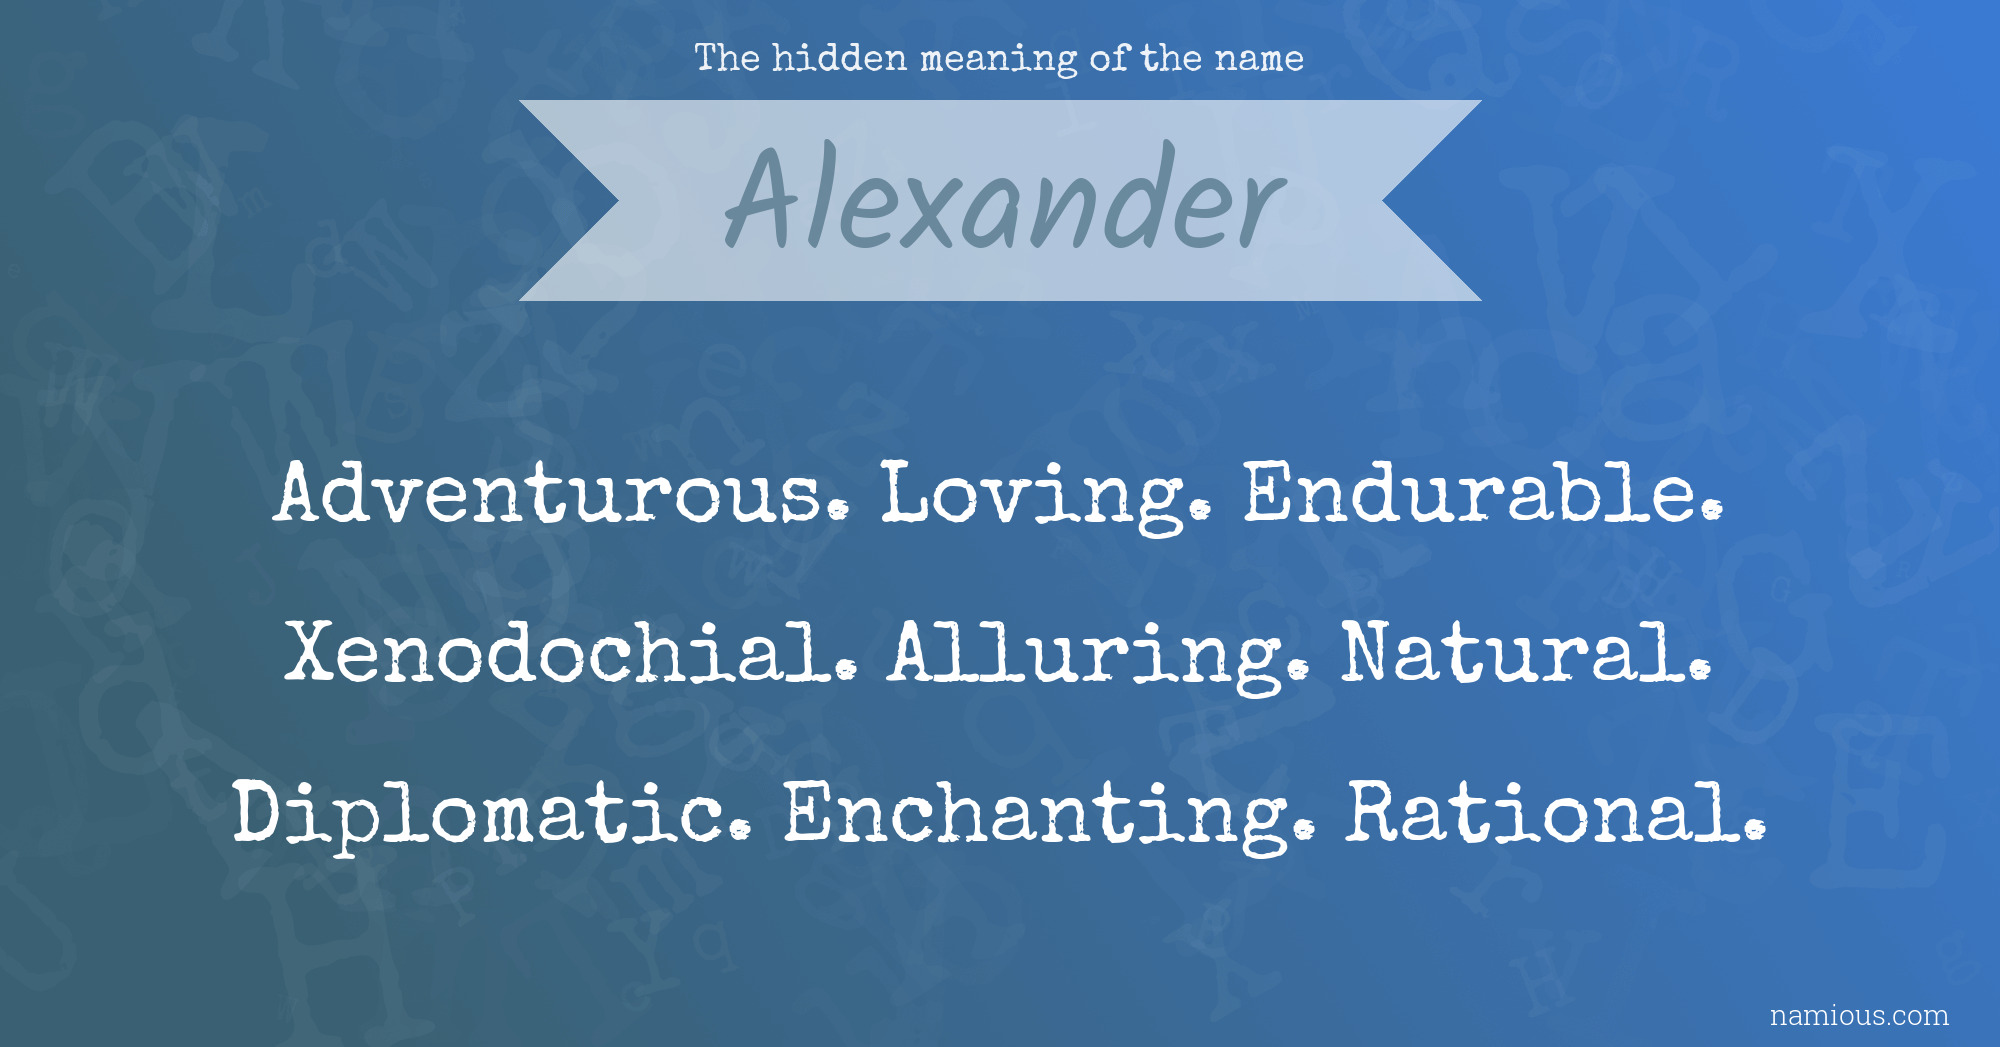 The hidden meaning of the name Alexander